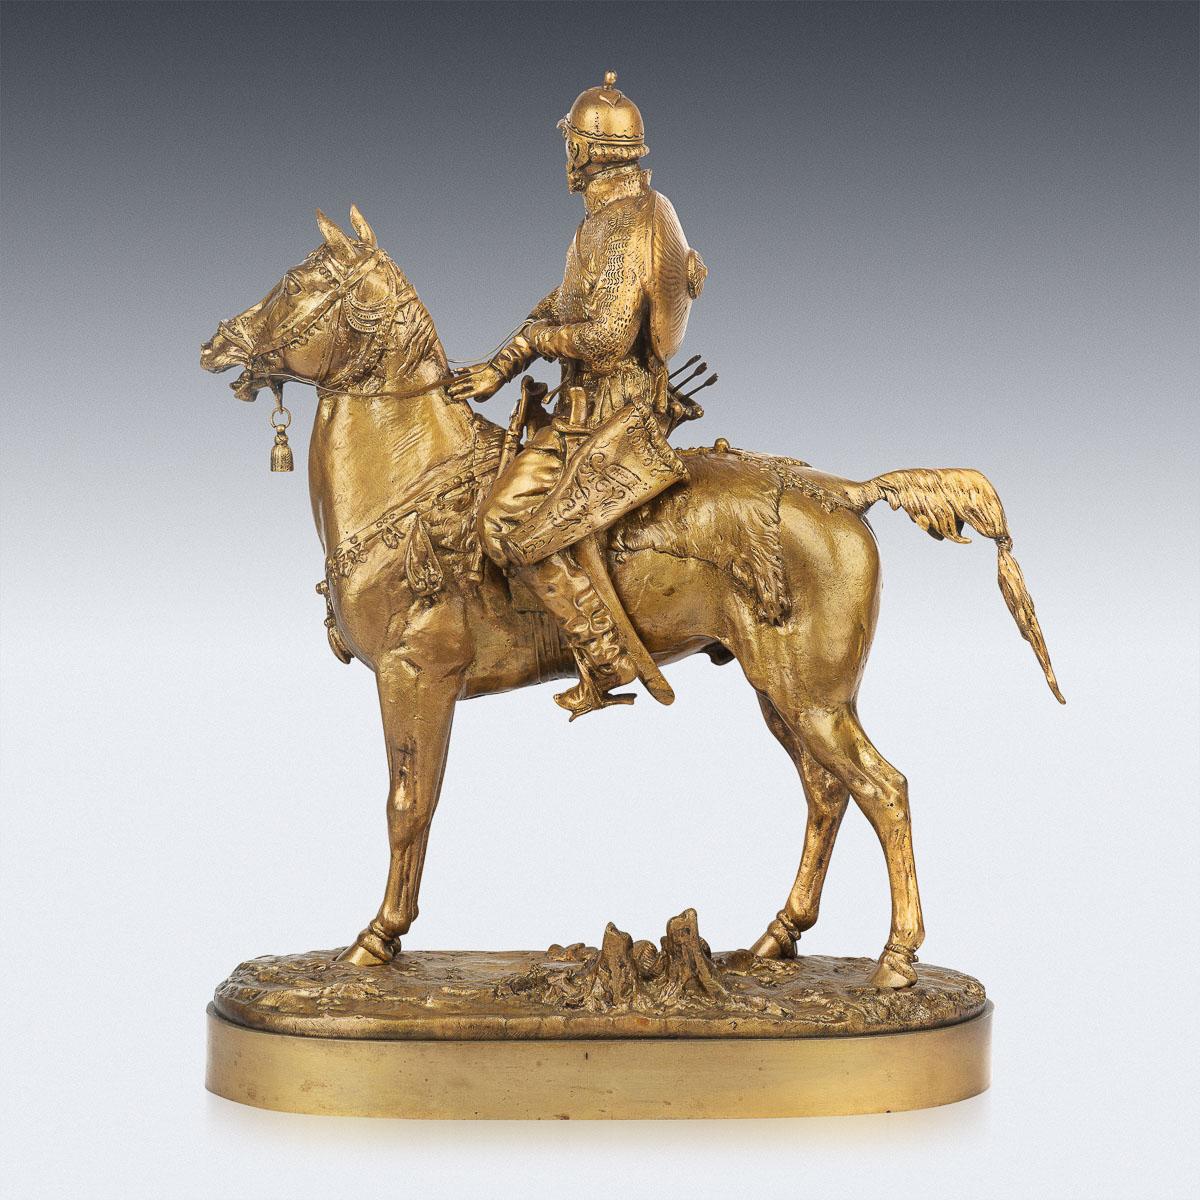 Antique late-19th century Russian cast gilt bronze of 'Oprichnik' (Prince Vyazemskii) by the renowned Evgeni Alexandrovich Lanceray, 1848-1886. Evgeni Lanceray, was an exceptionally well known Russian sculptor of the 19th century. He is particularly